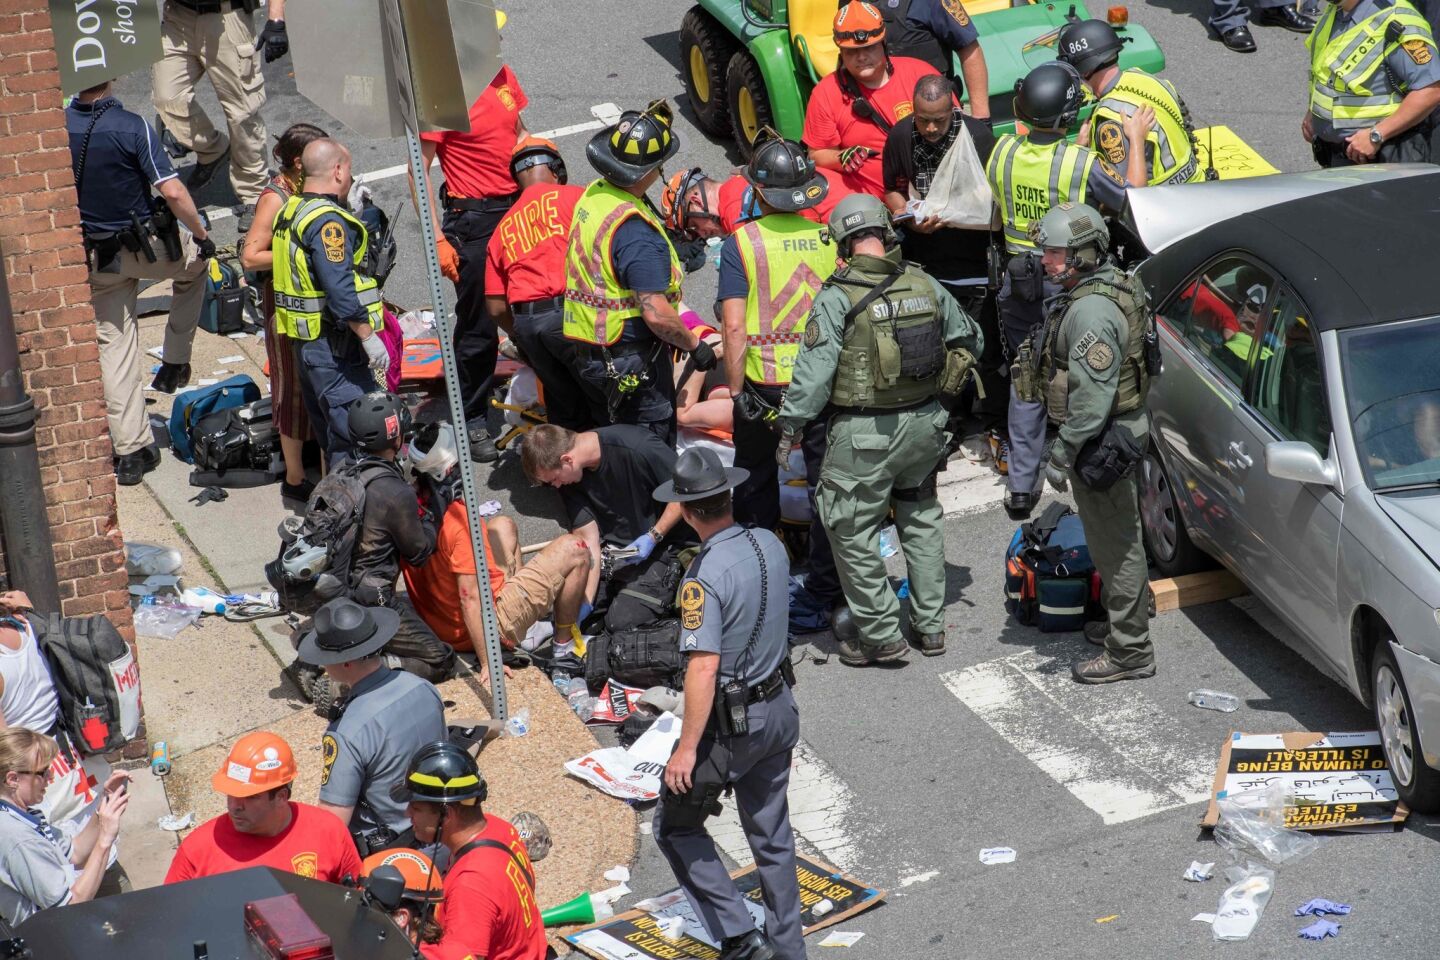 People receive first aid after a car drove into a crowd of protesters in Charlottesville, VA.